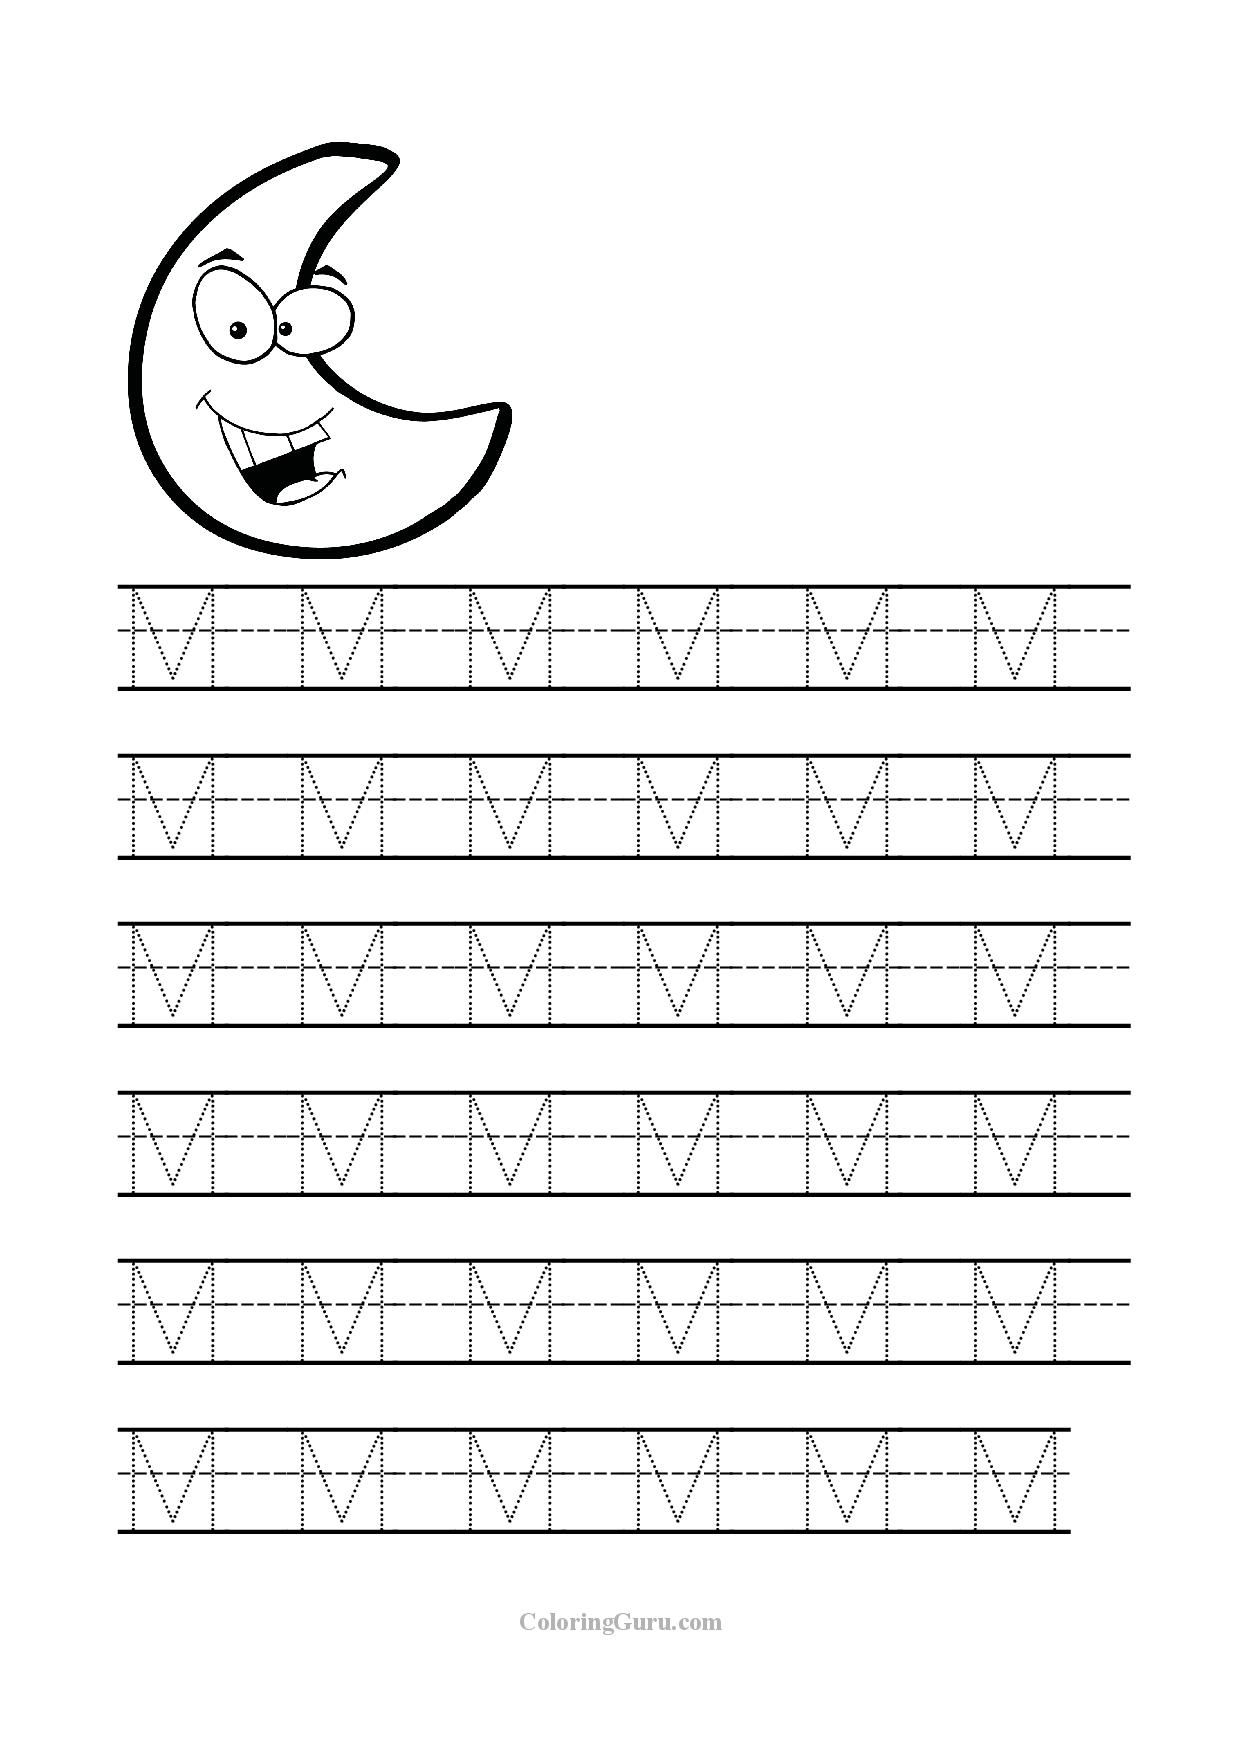 Free Printable Tracing Letter M Worksheets For Preschool with Tracing Letter M Worksheets